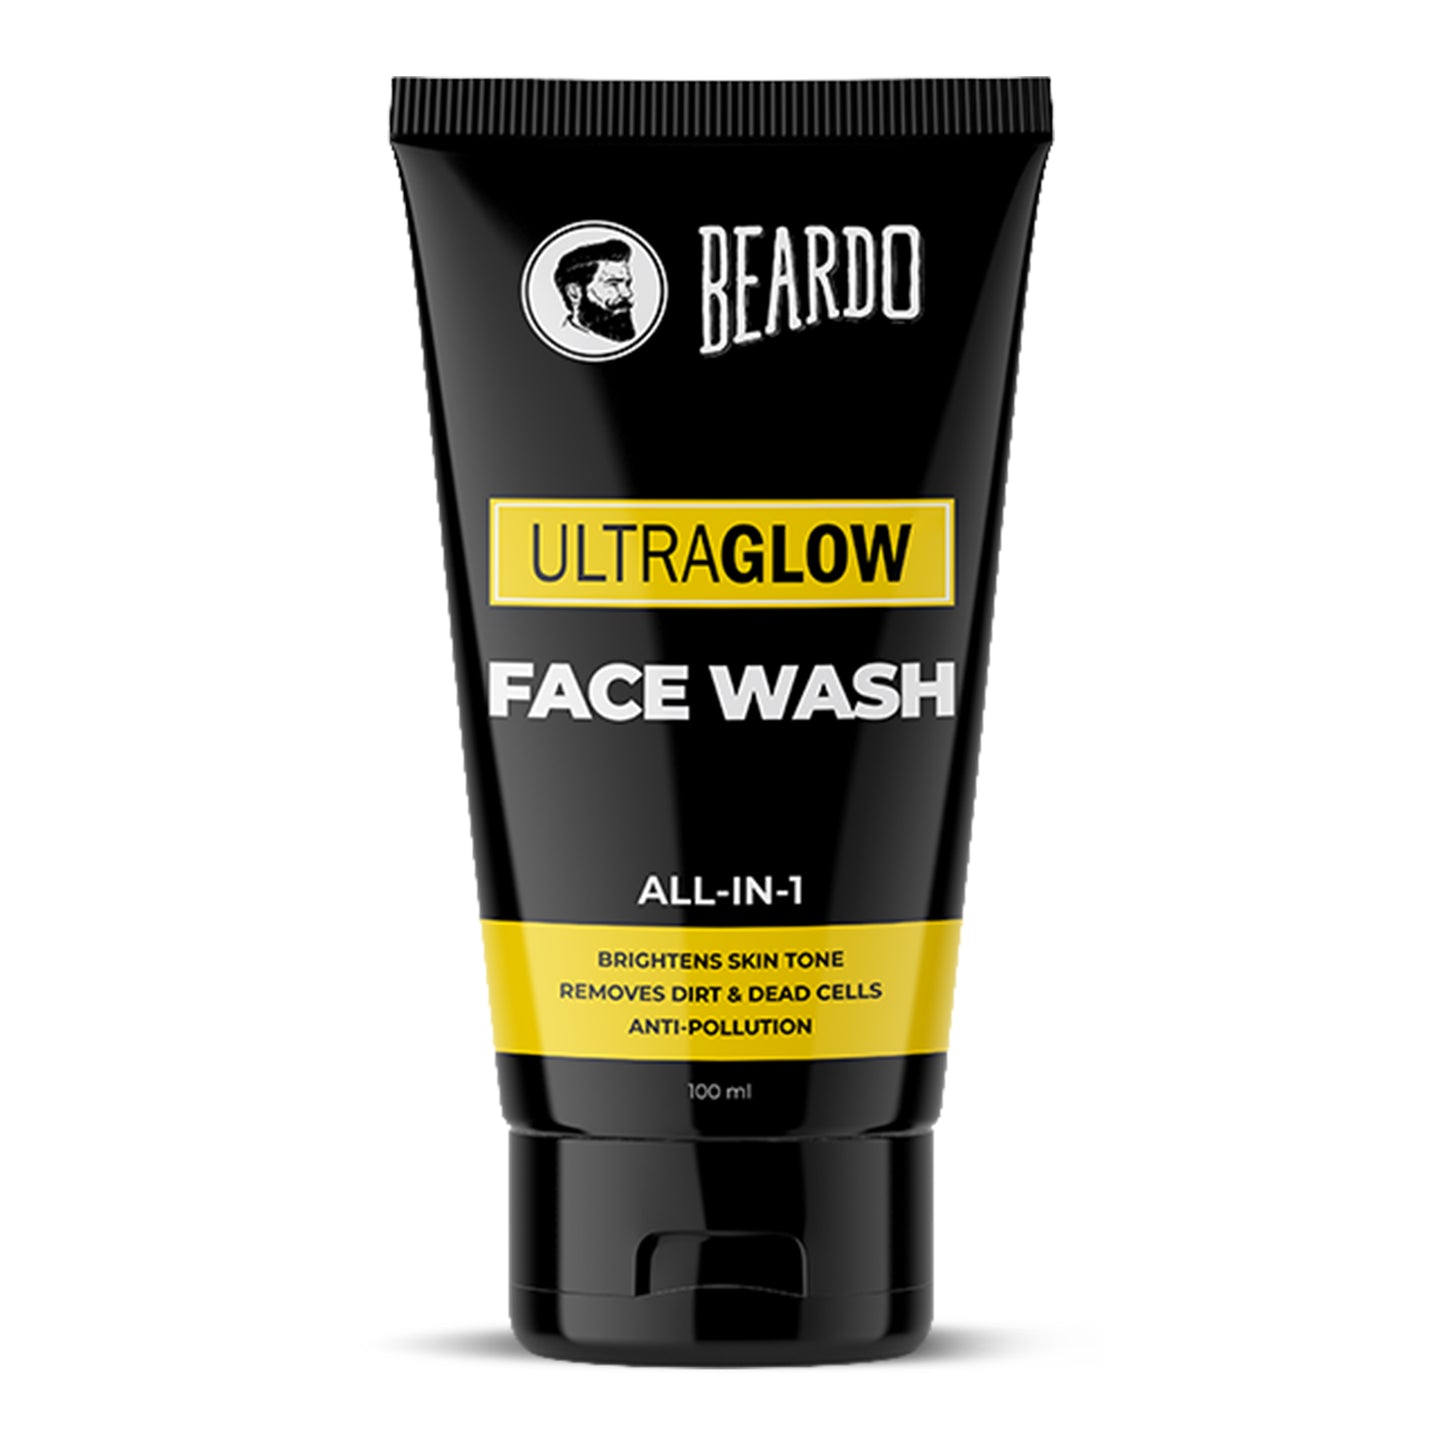 Best face wash for men, face wash for dry skin men,  face wash for combination skin, skin brightening face wash, removes dirt, all in one face wash, top face wash for men